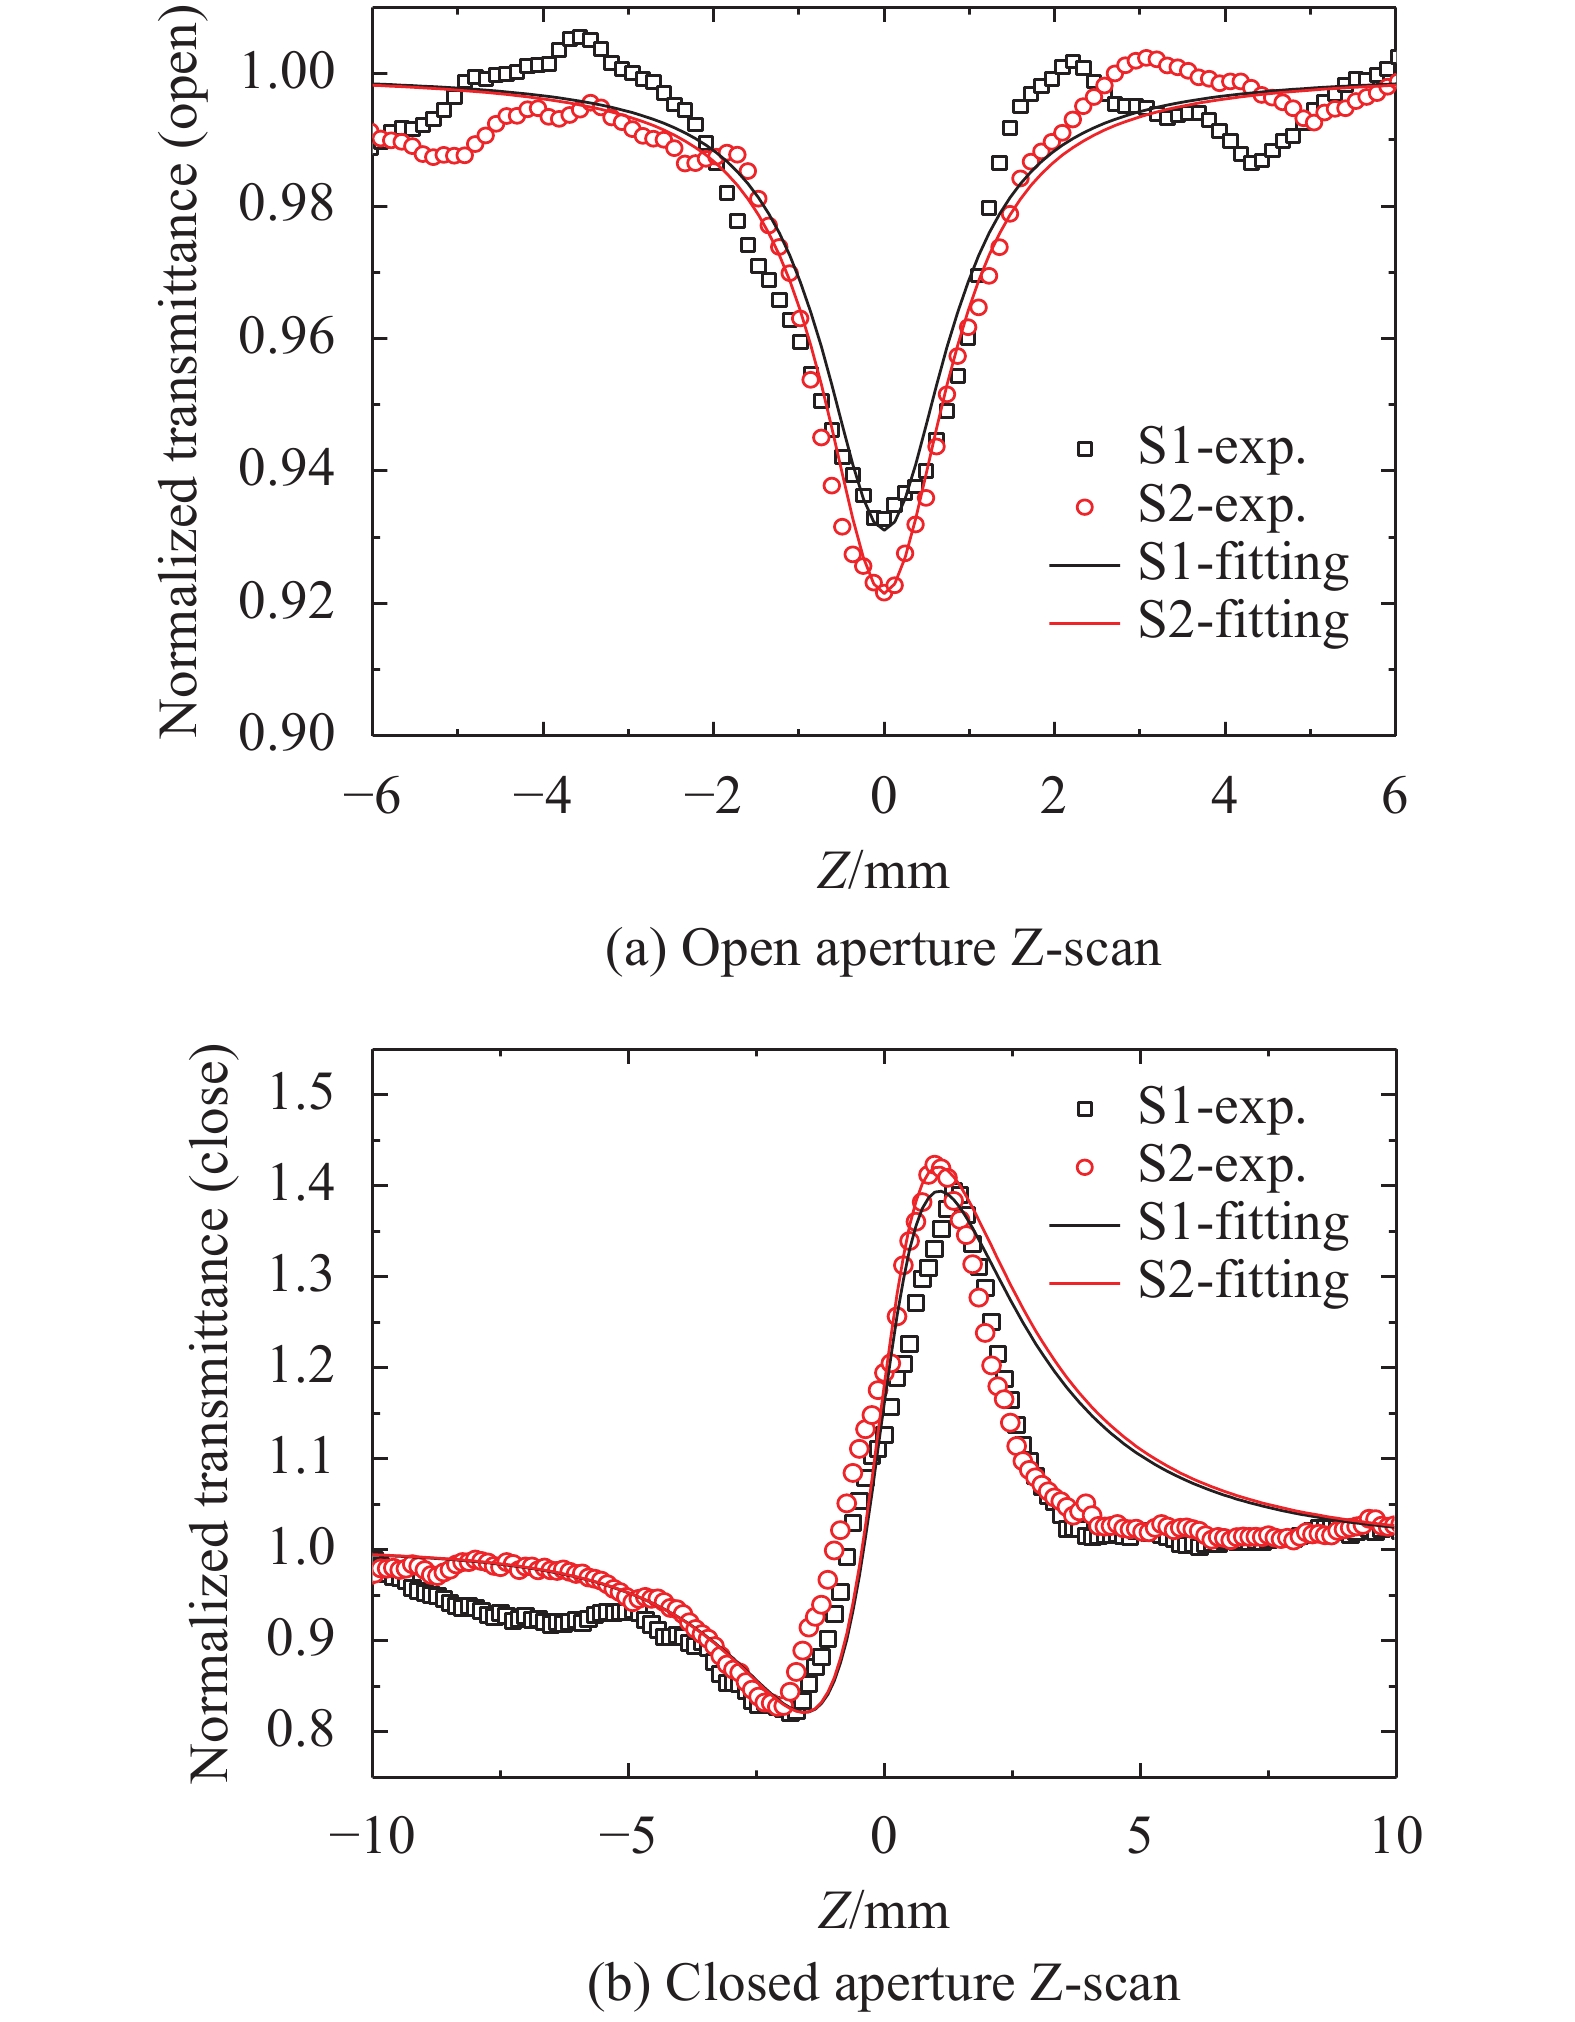 Open/closed aperture Z-scan normalized transmittance curves of water-soluble CdTe/CdS, S1-S2 quantum dots